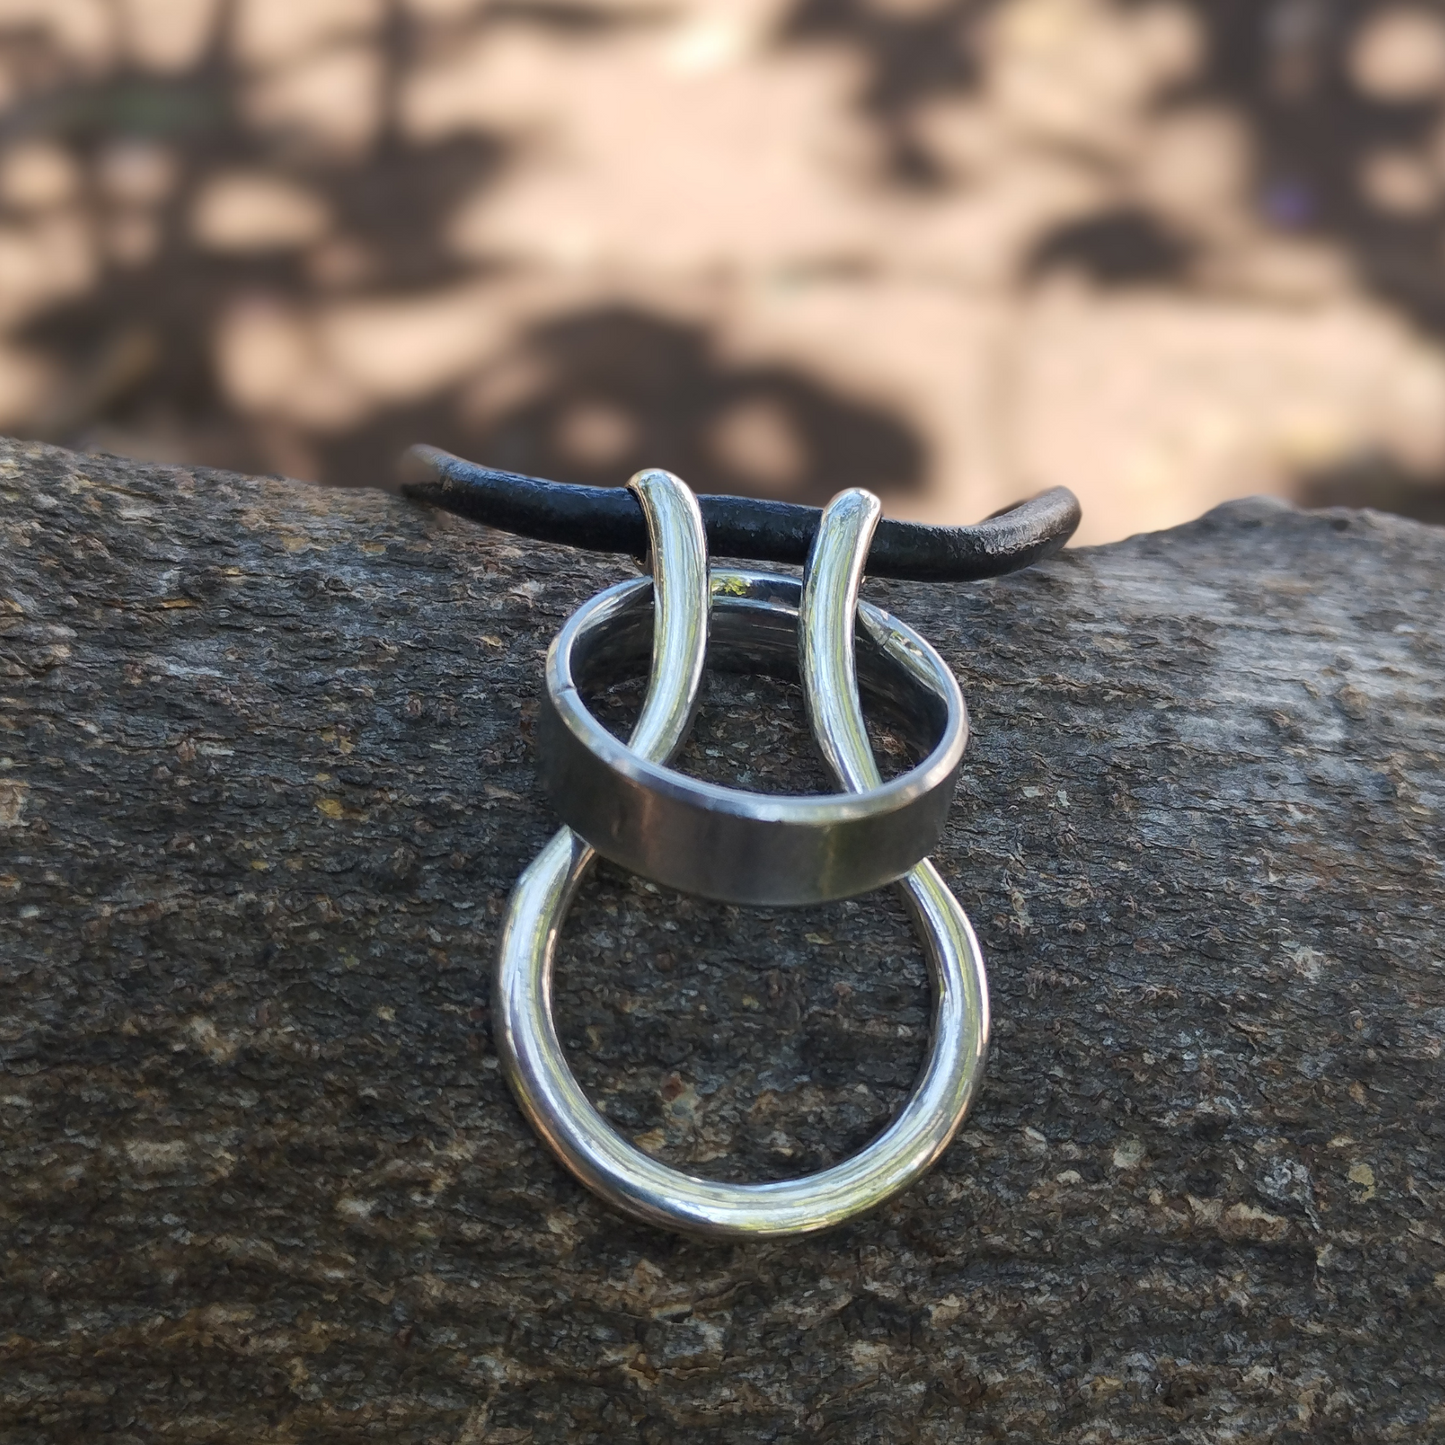 handmade silver ring saver made in Africa